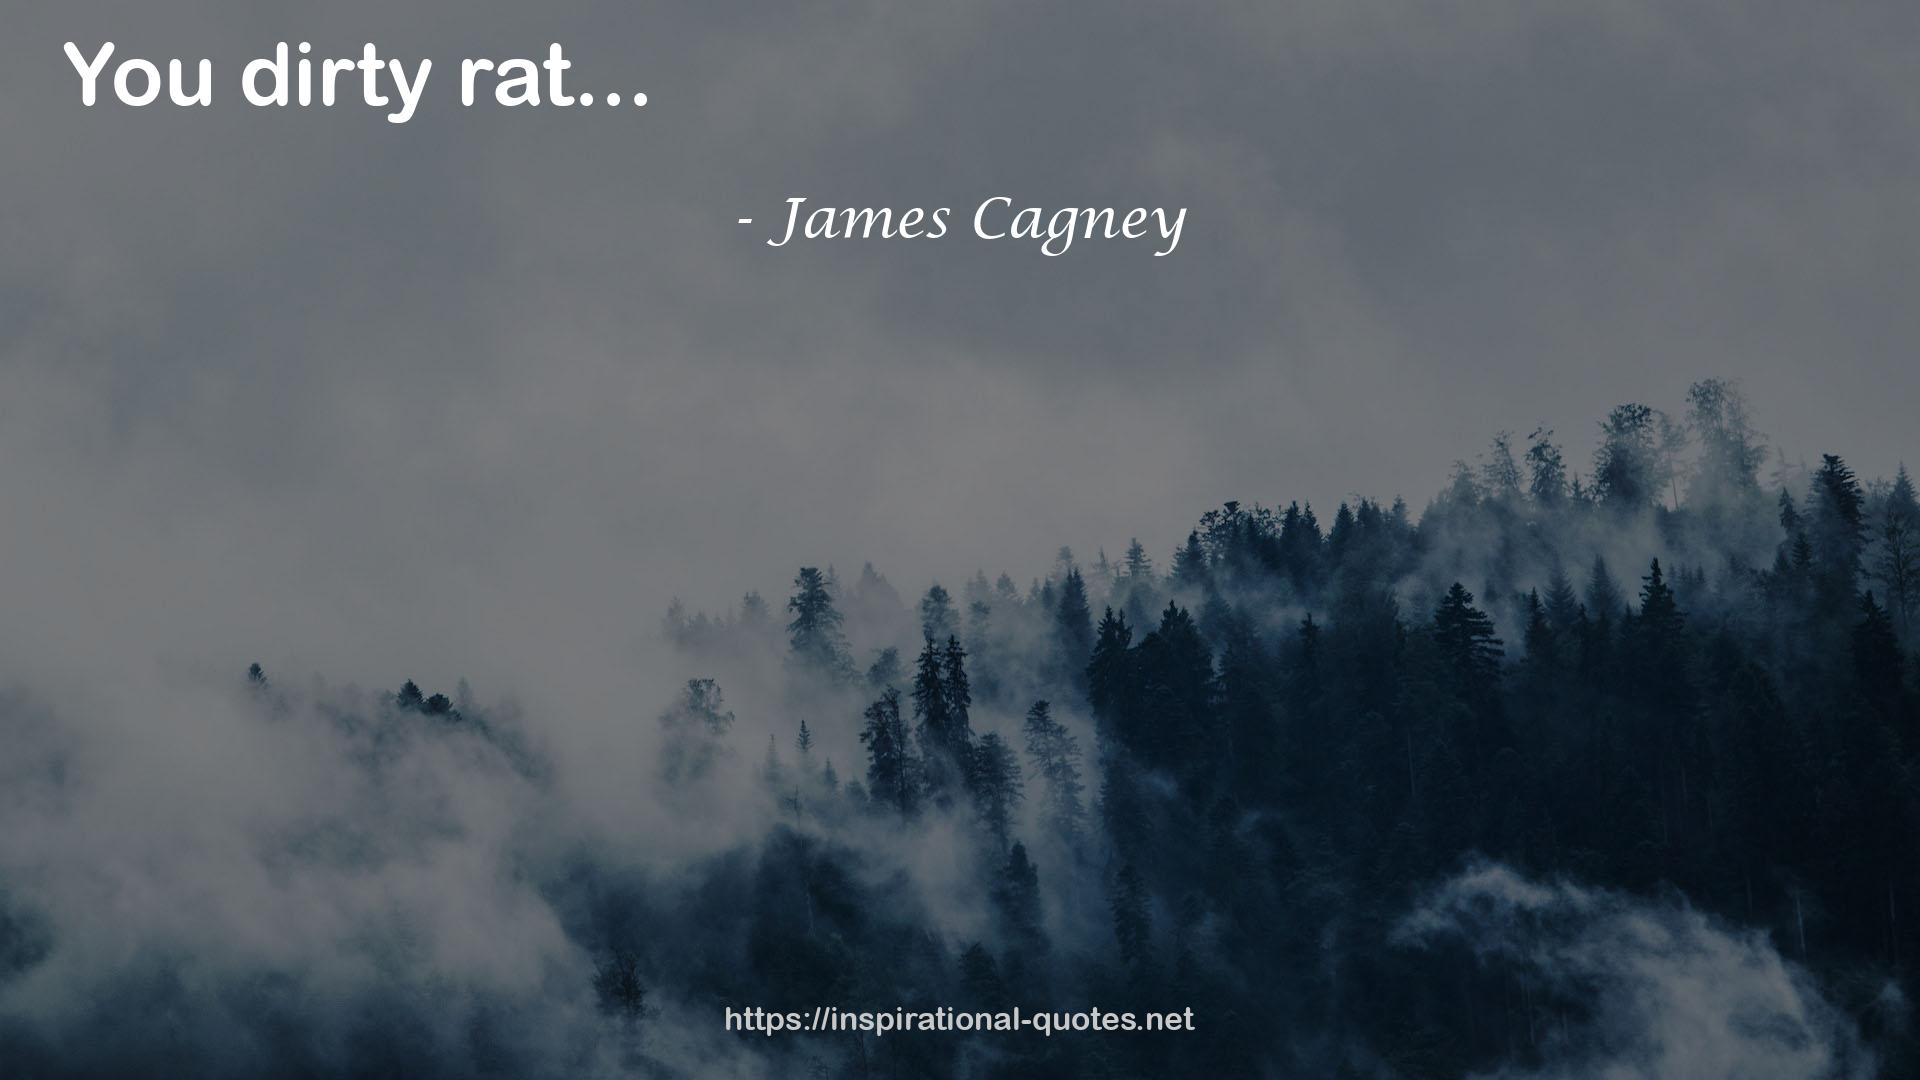 James Cagney QUOTES